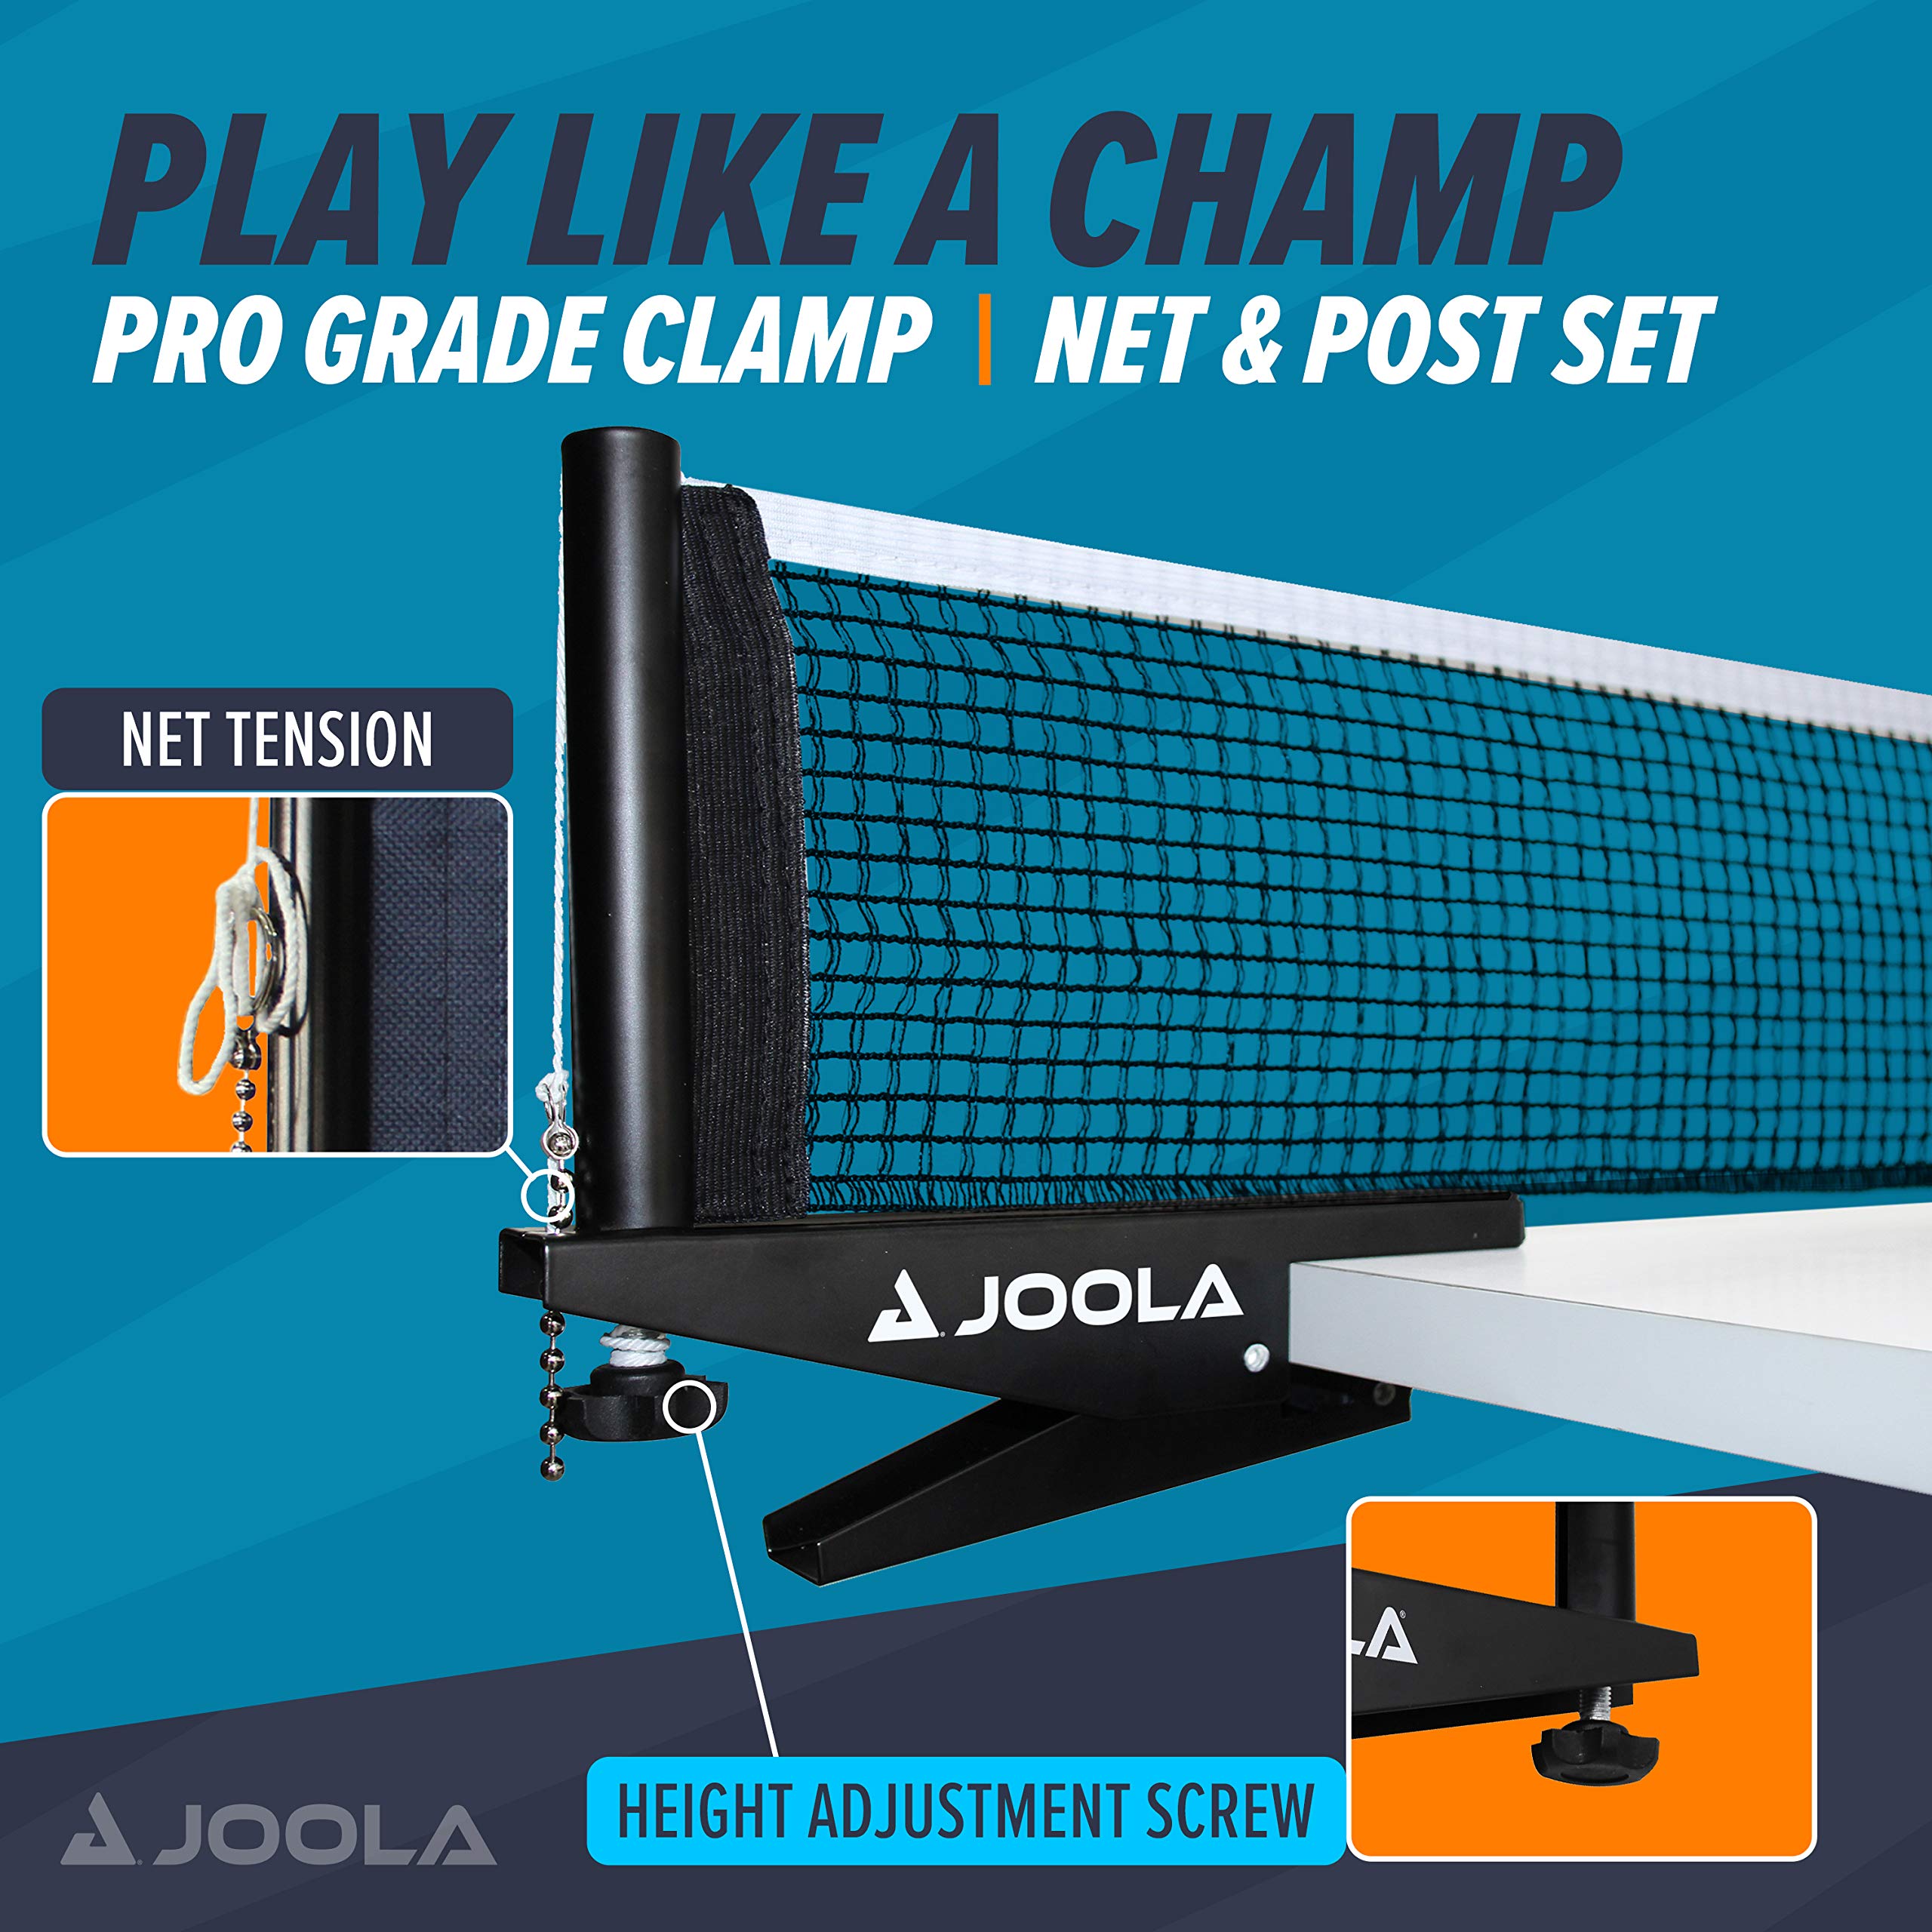 JOOLA Premium Inside Table Tennis Net and Post Set - Portable and Easy Setup 72" Regulation Size Ping Pong Spring Clamp Net, Black